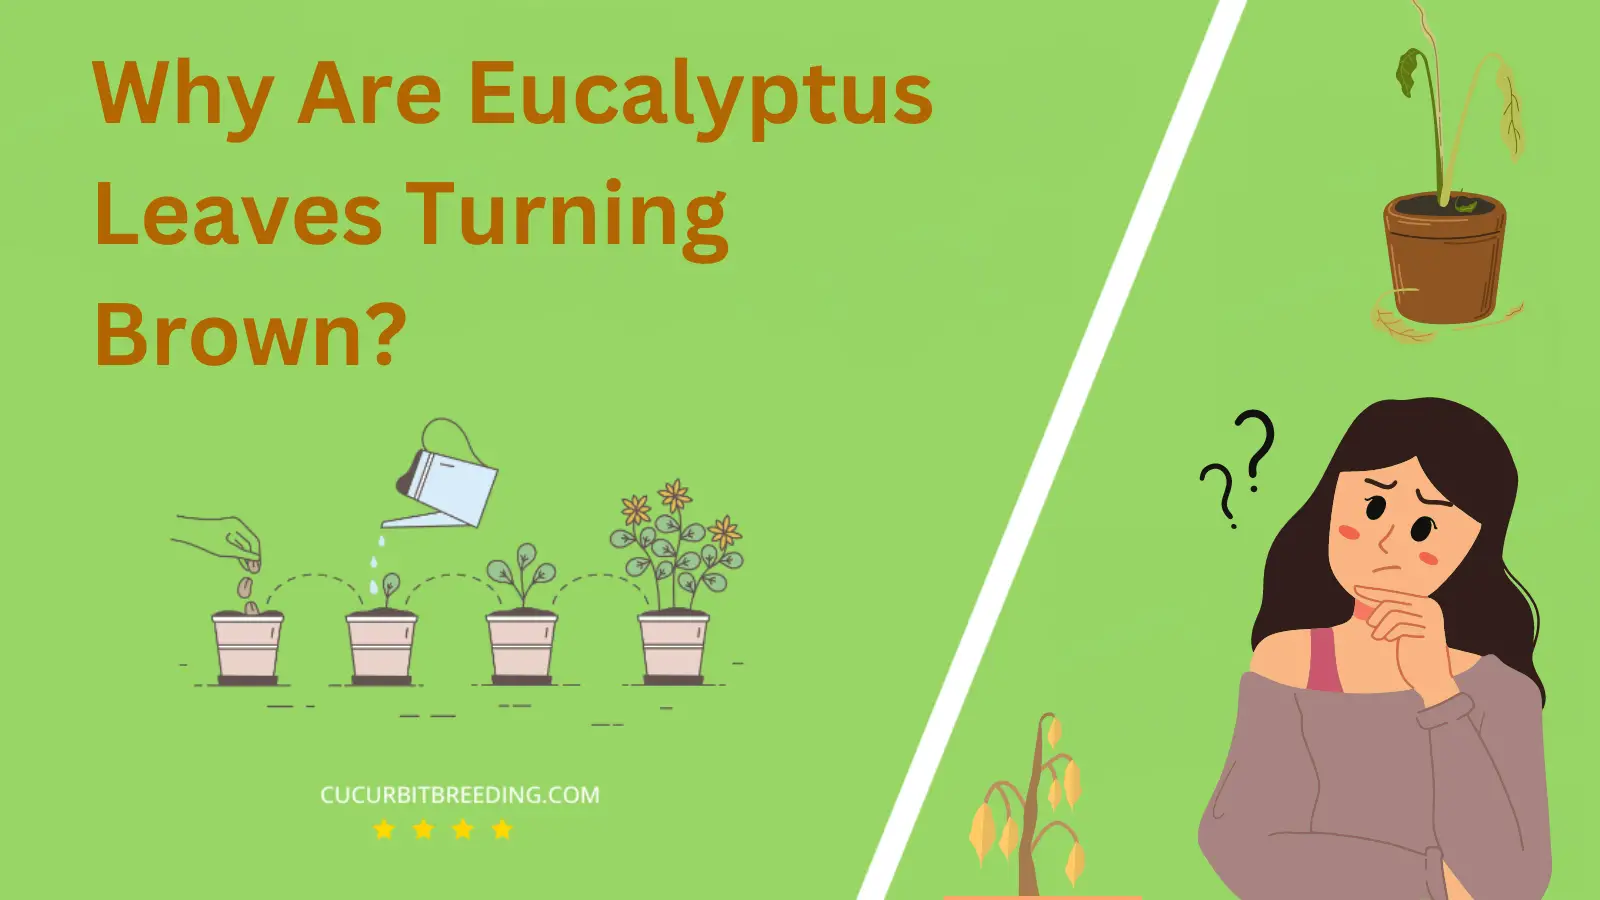 Why Are Eucalyptus Leaves Turning Brown